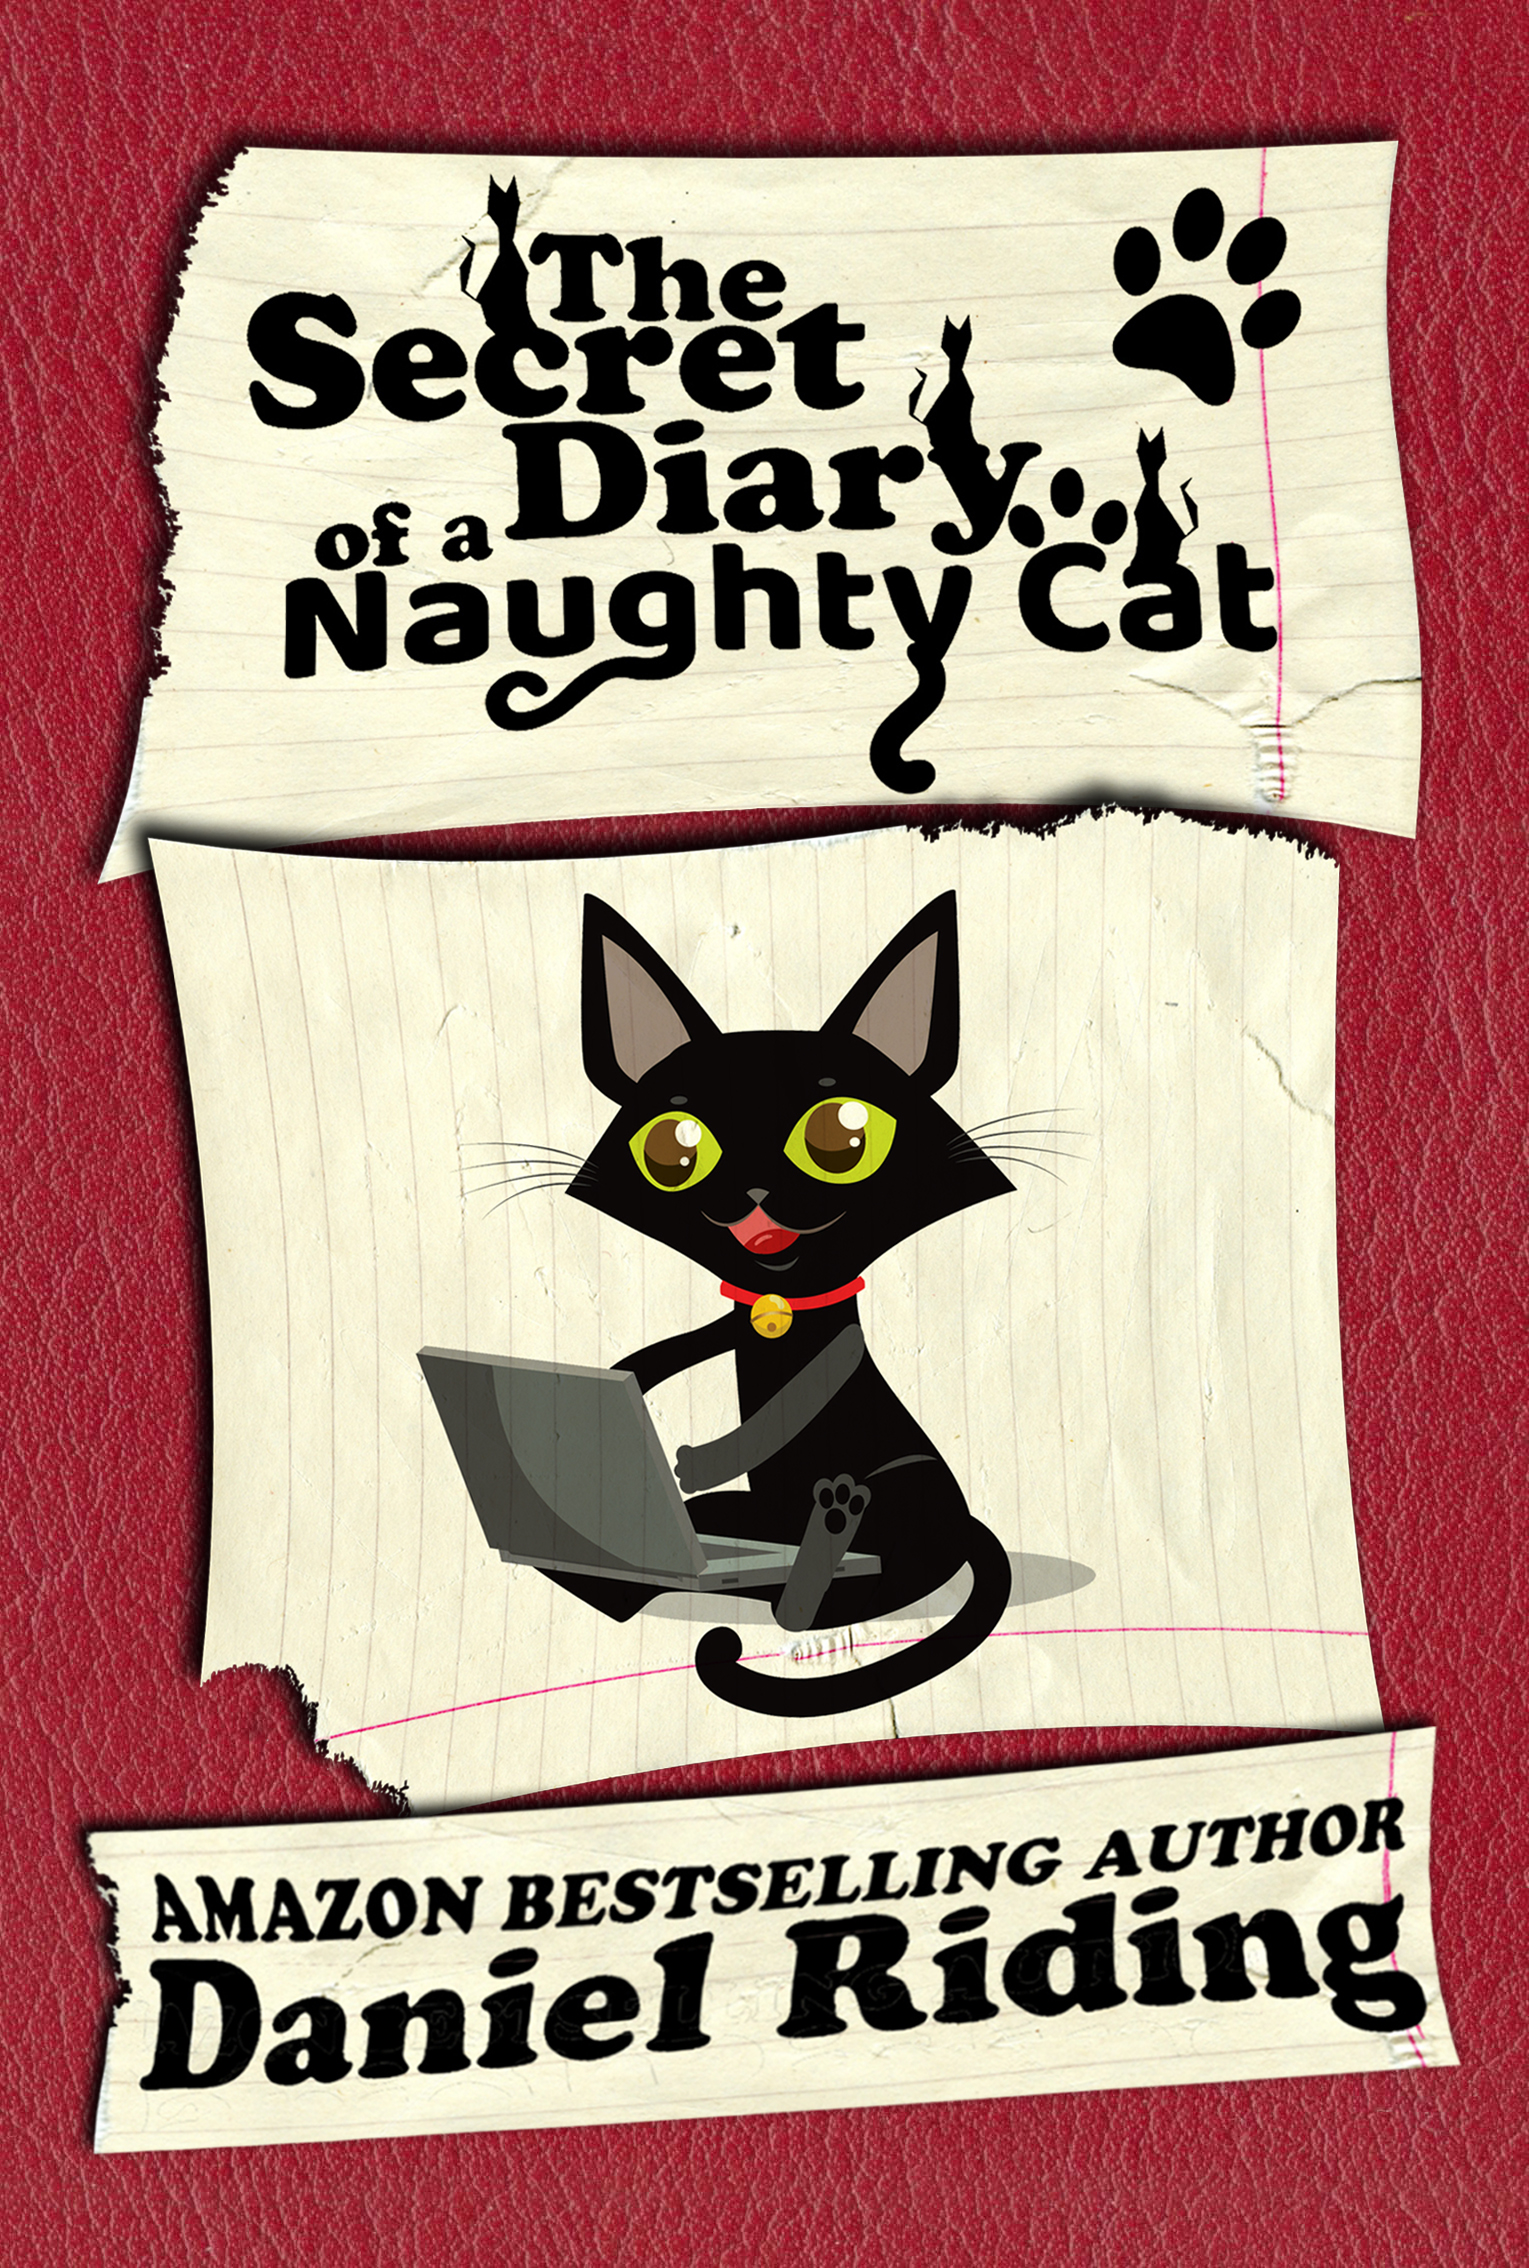 FREE: The Secret Diary of a Naughty Cat by Daniel Riding